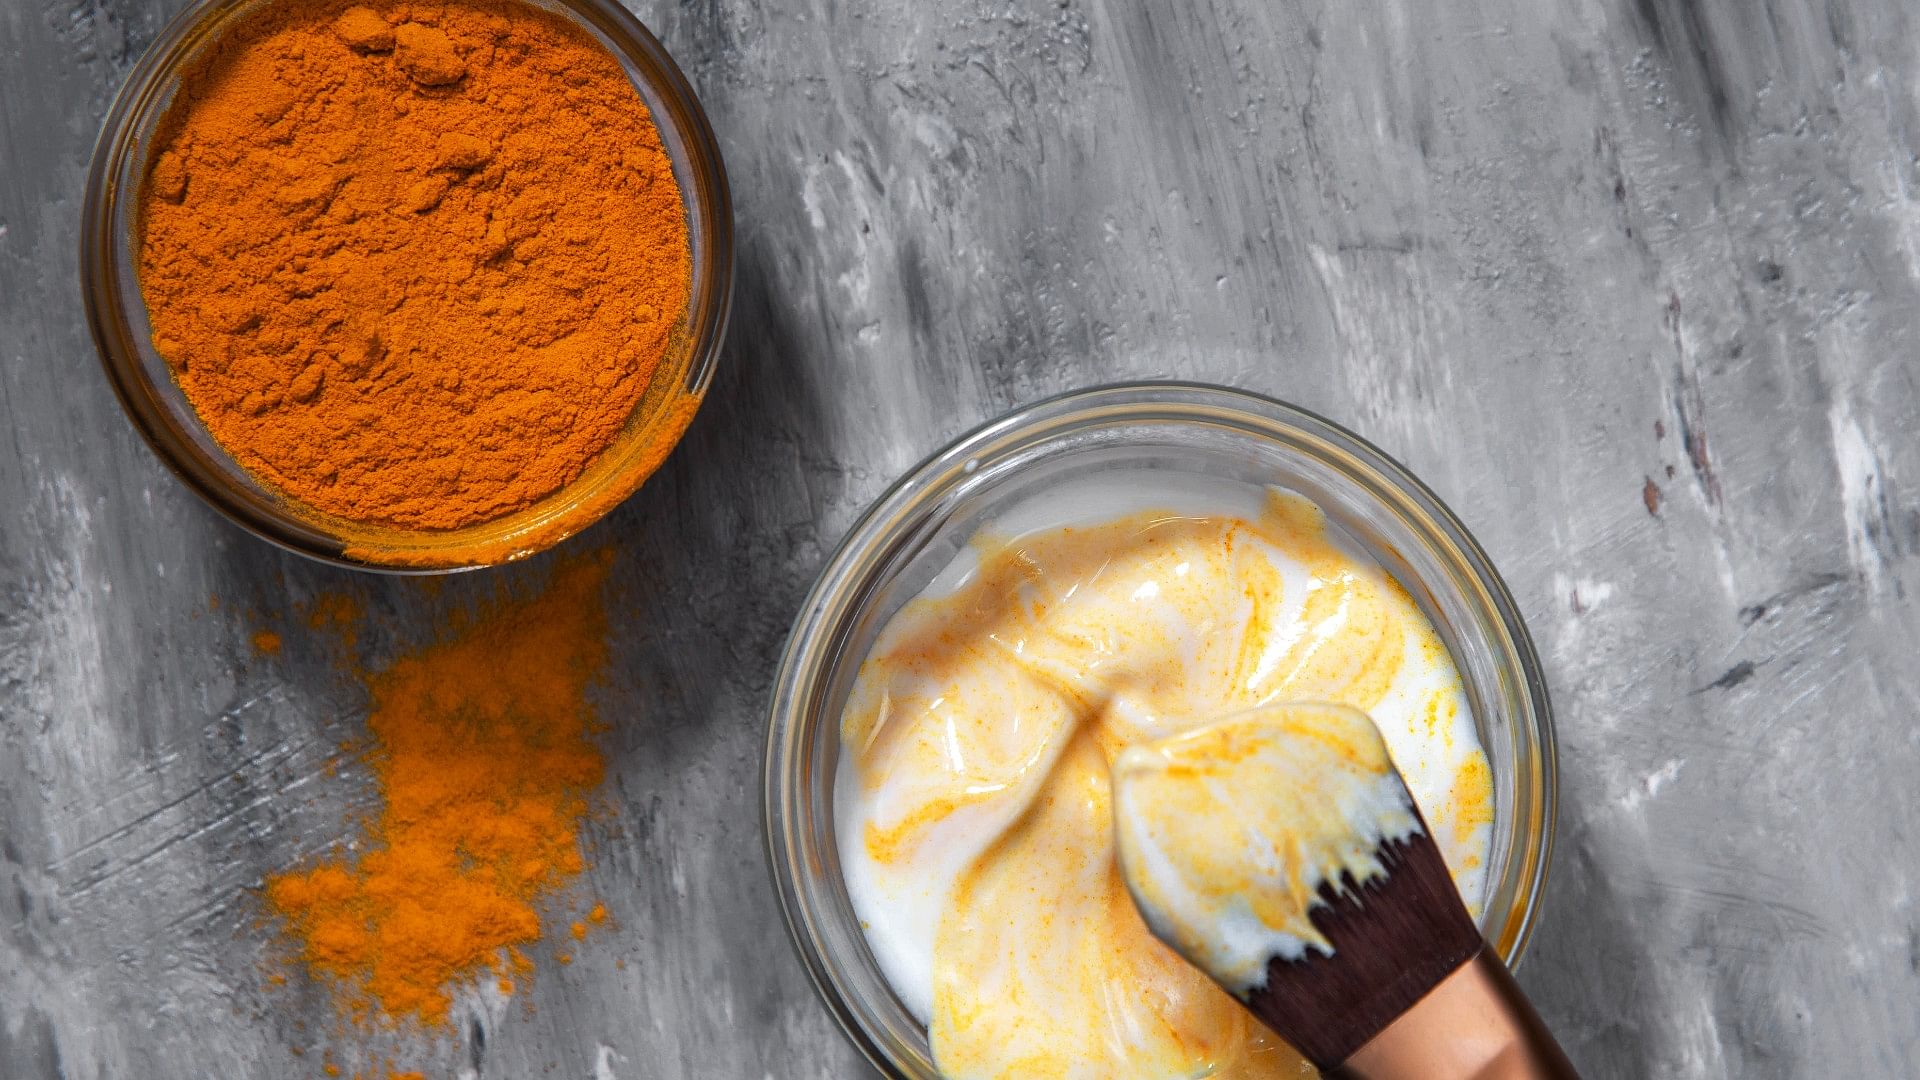 Chehre Par Haldi Kaise Lagaye  Five ways to apply turmeric on the face for glowing skin